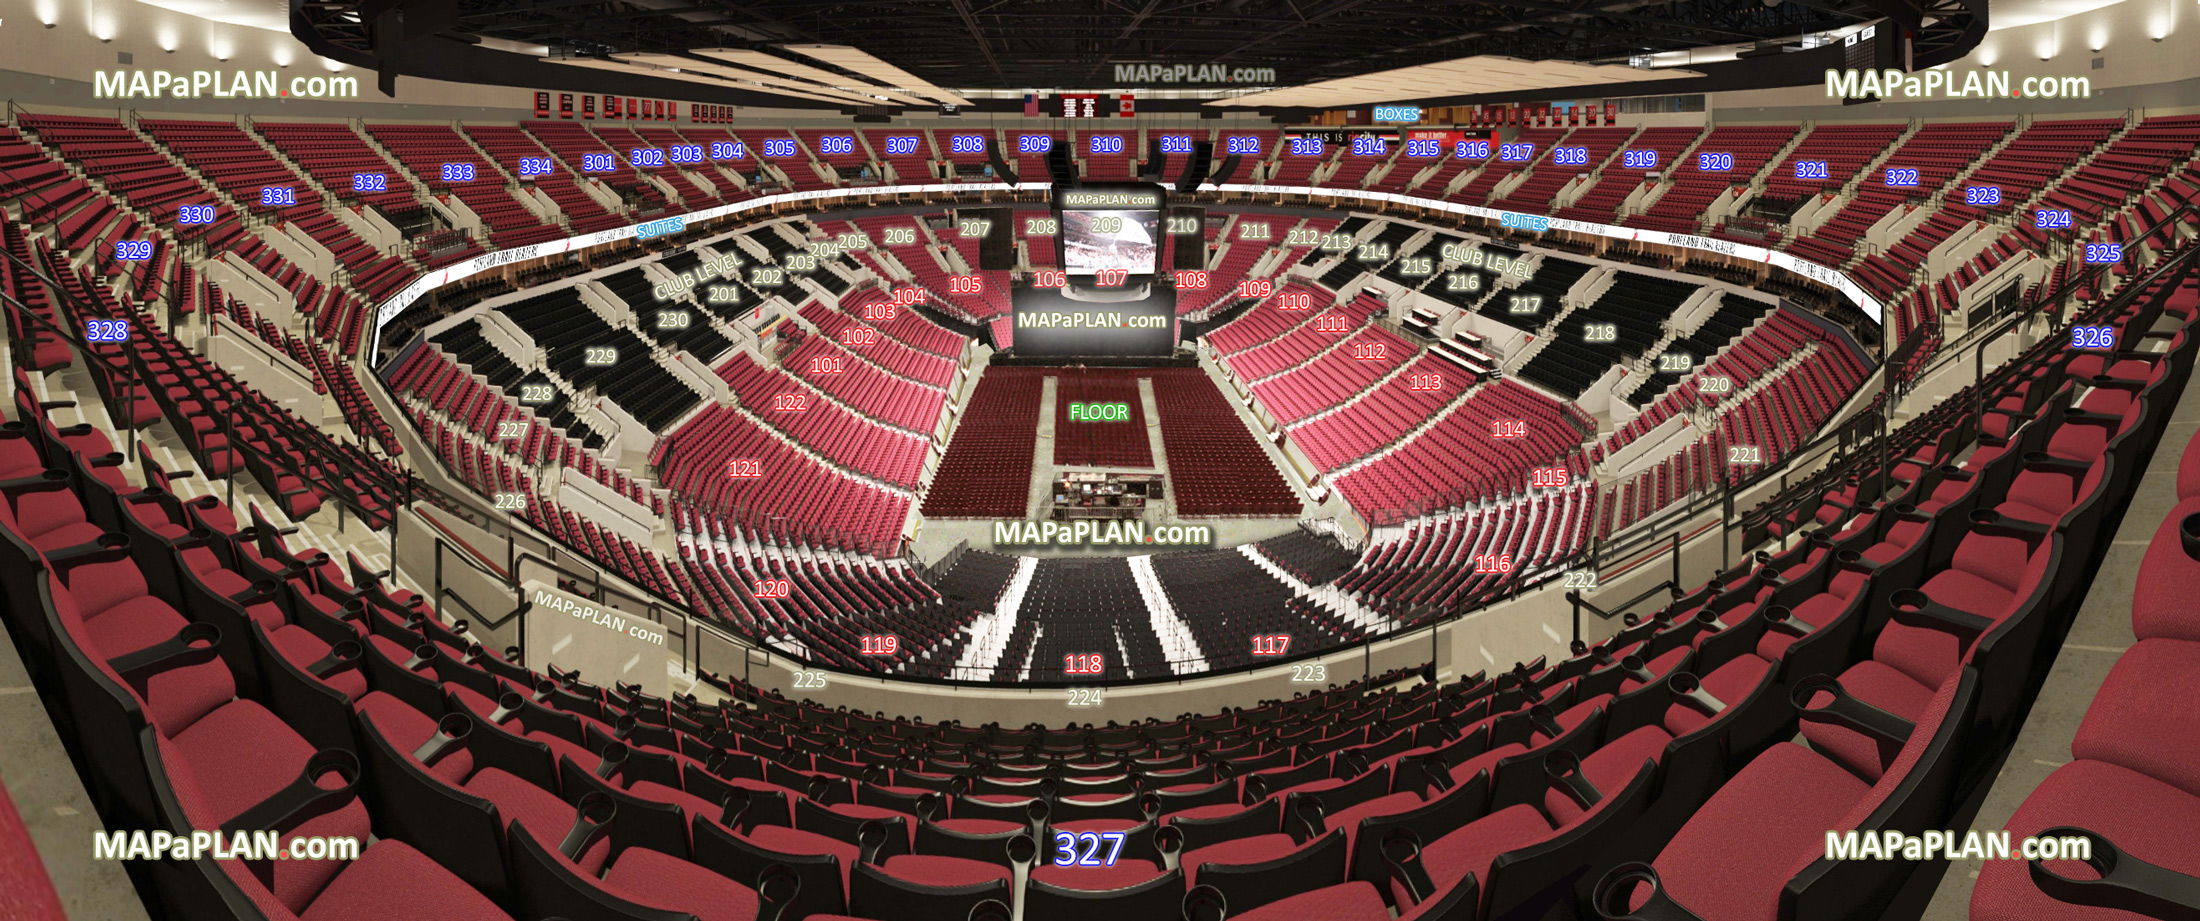 Moda Center (Rose Garden Arena) - View from Section 327 - O - Seat 10 - Rose Garden Arena virtual 3d interior tour & inside concert stage picture showing